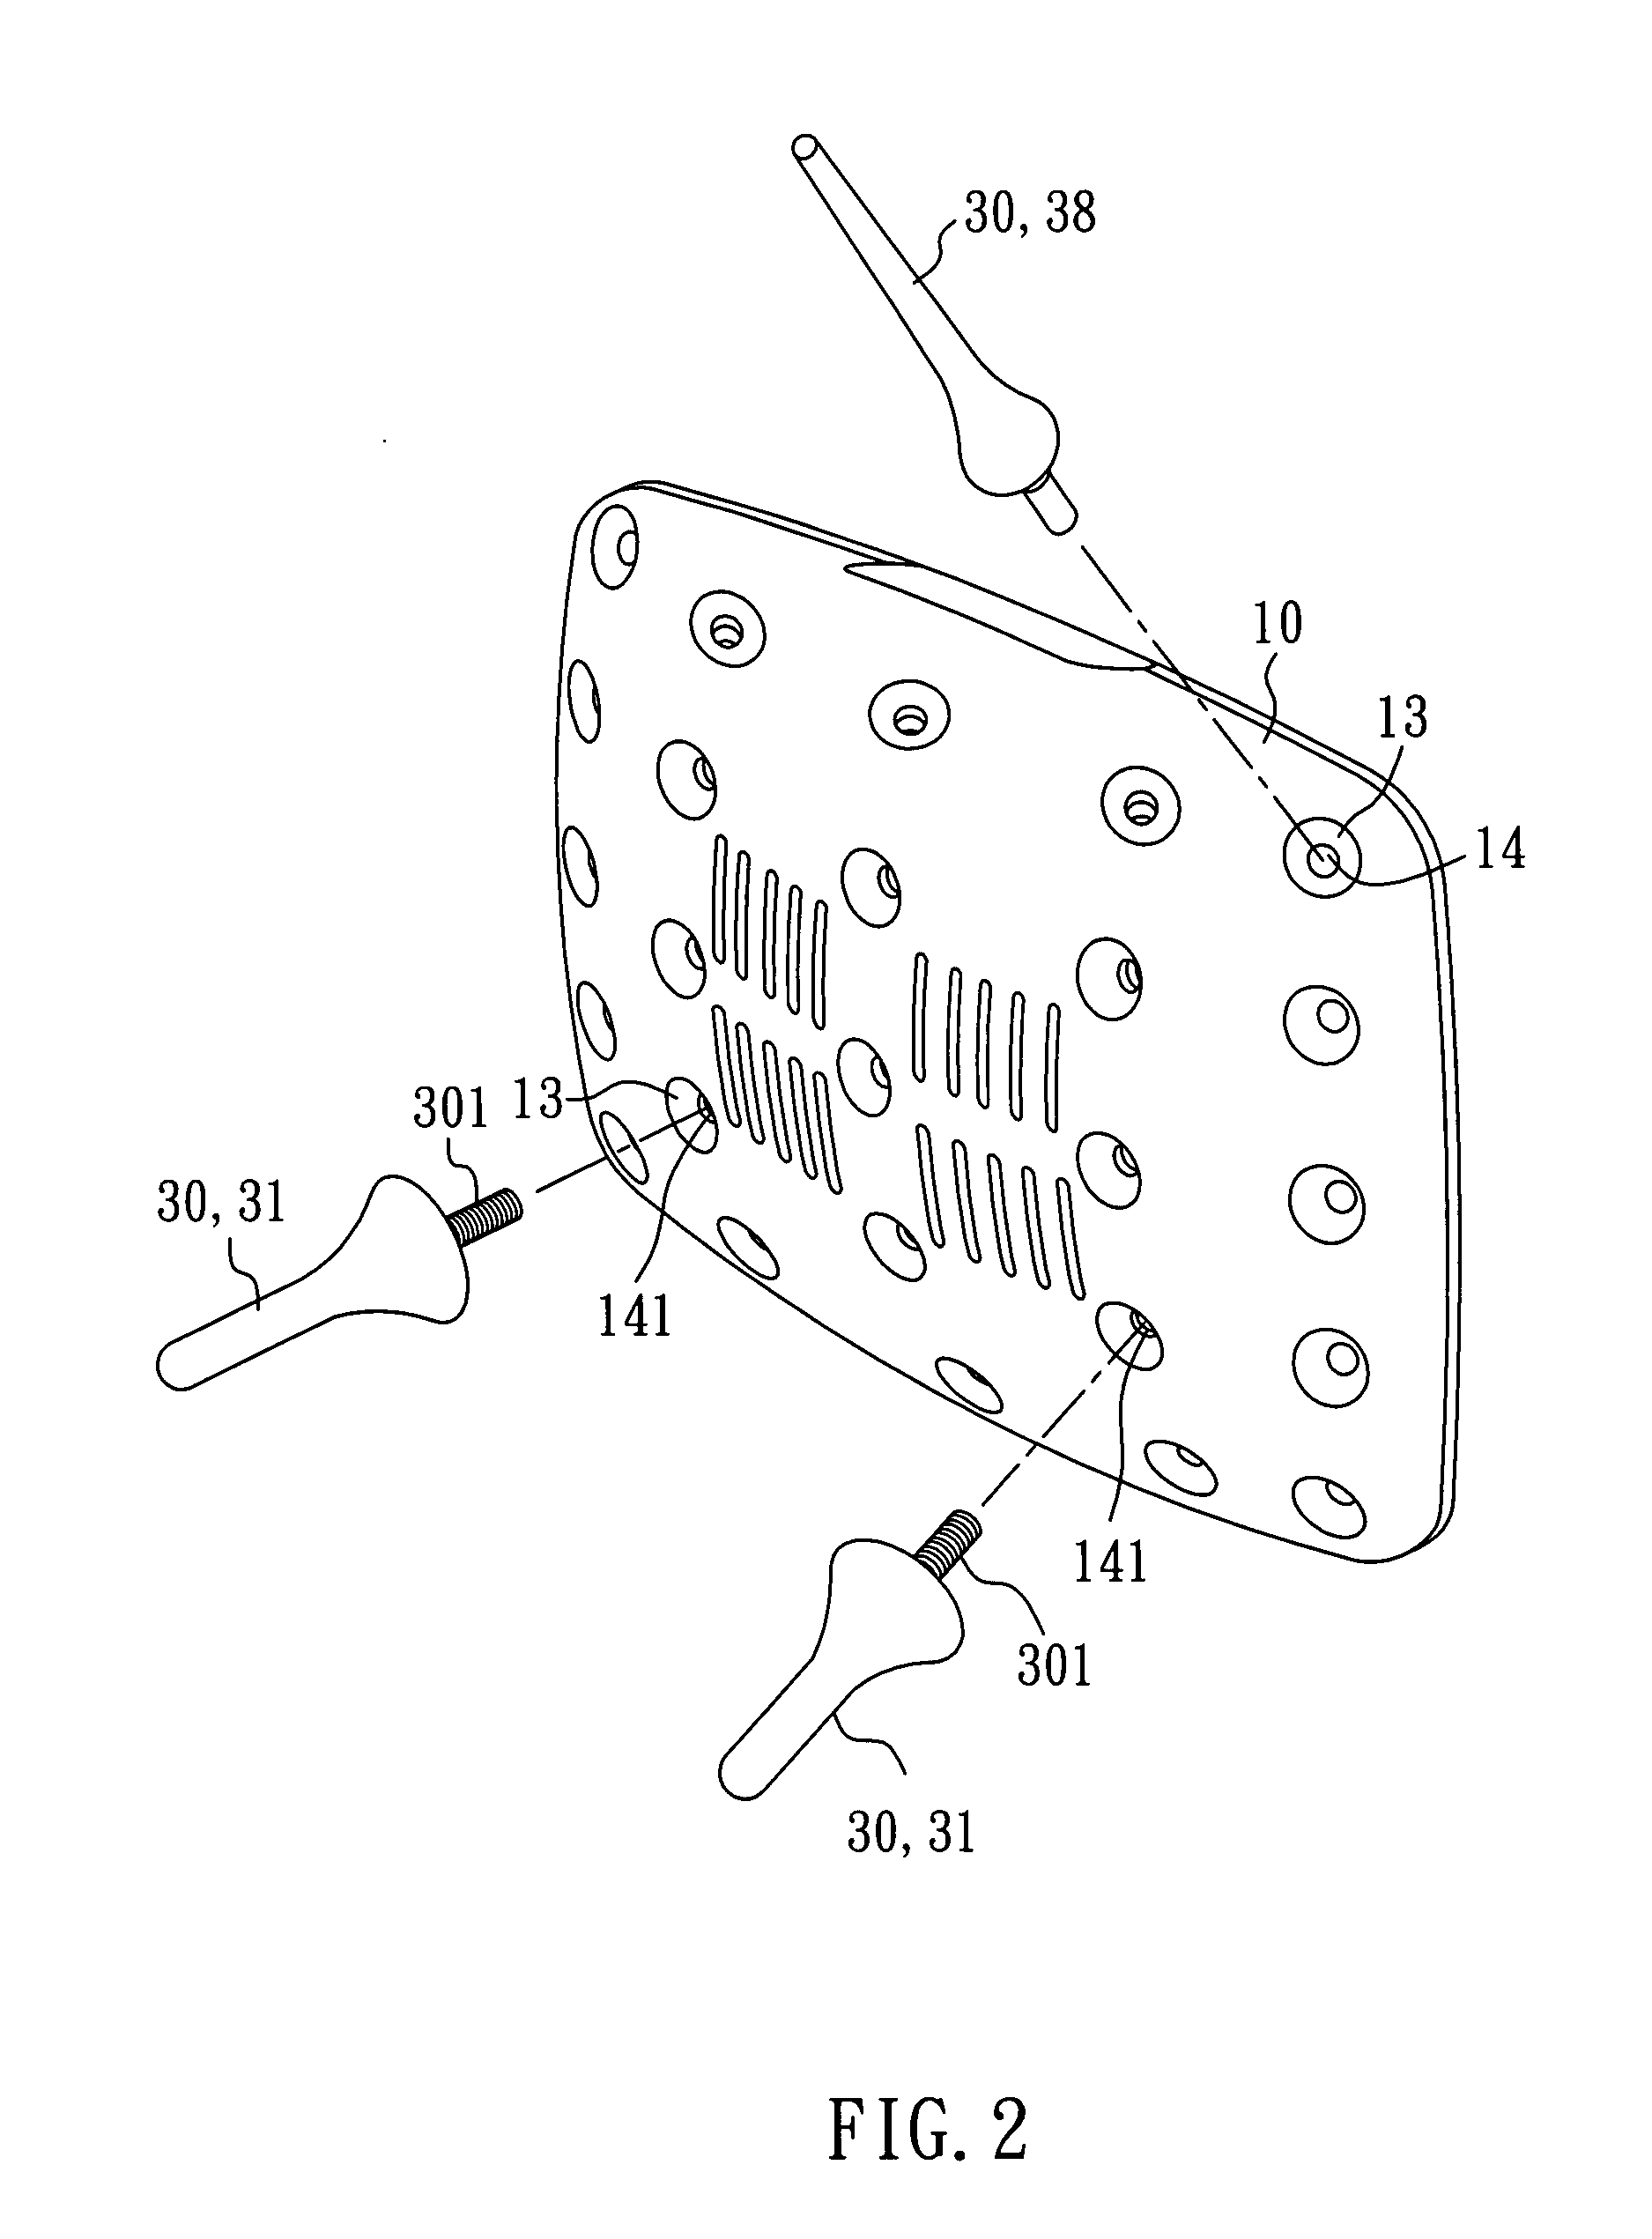 Assemblable display device